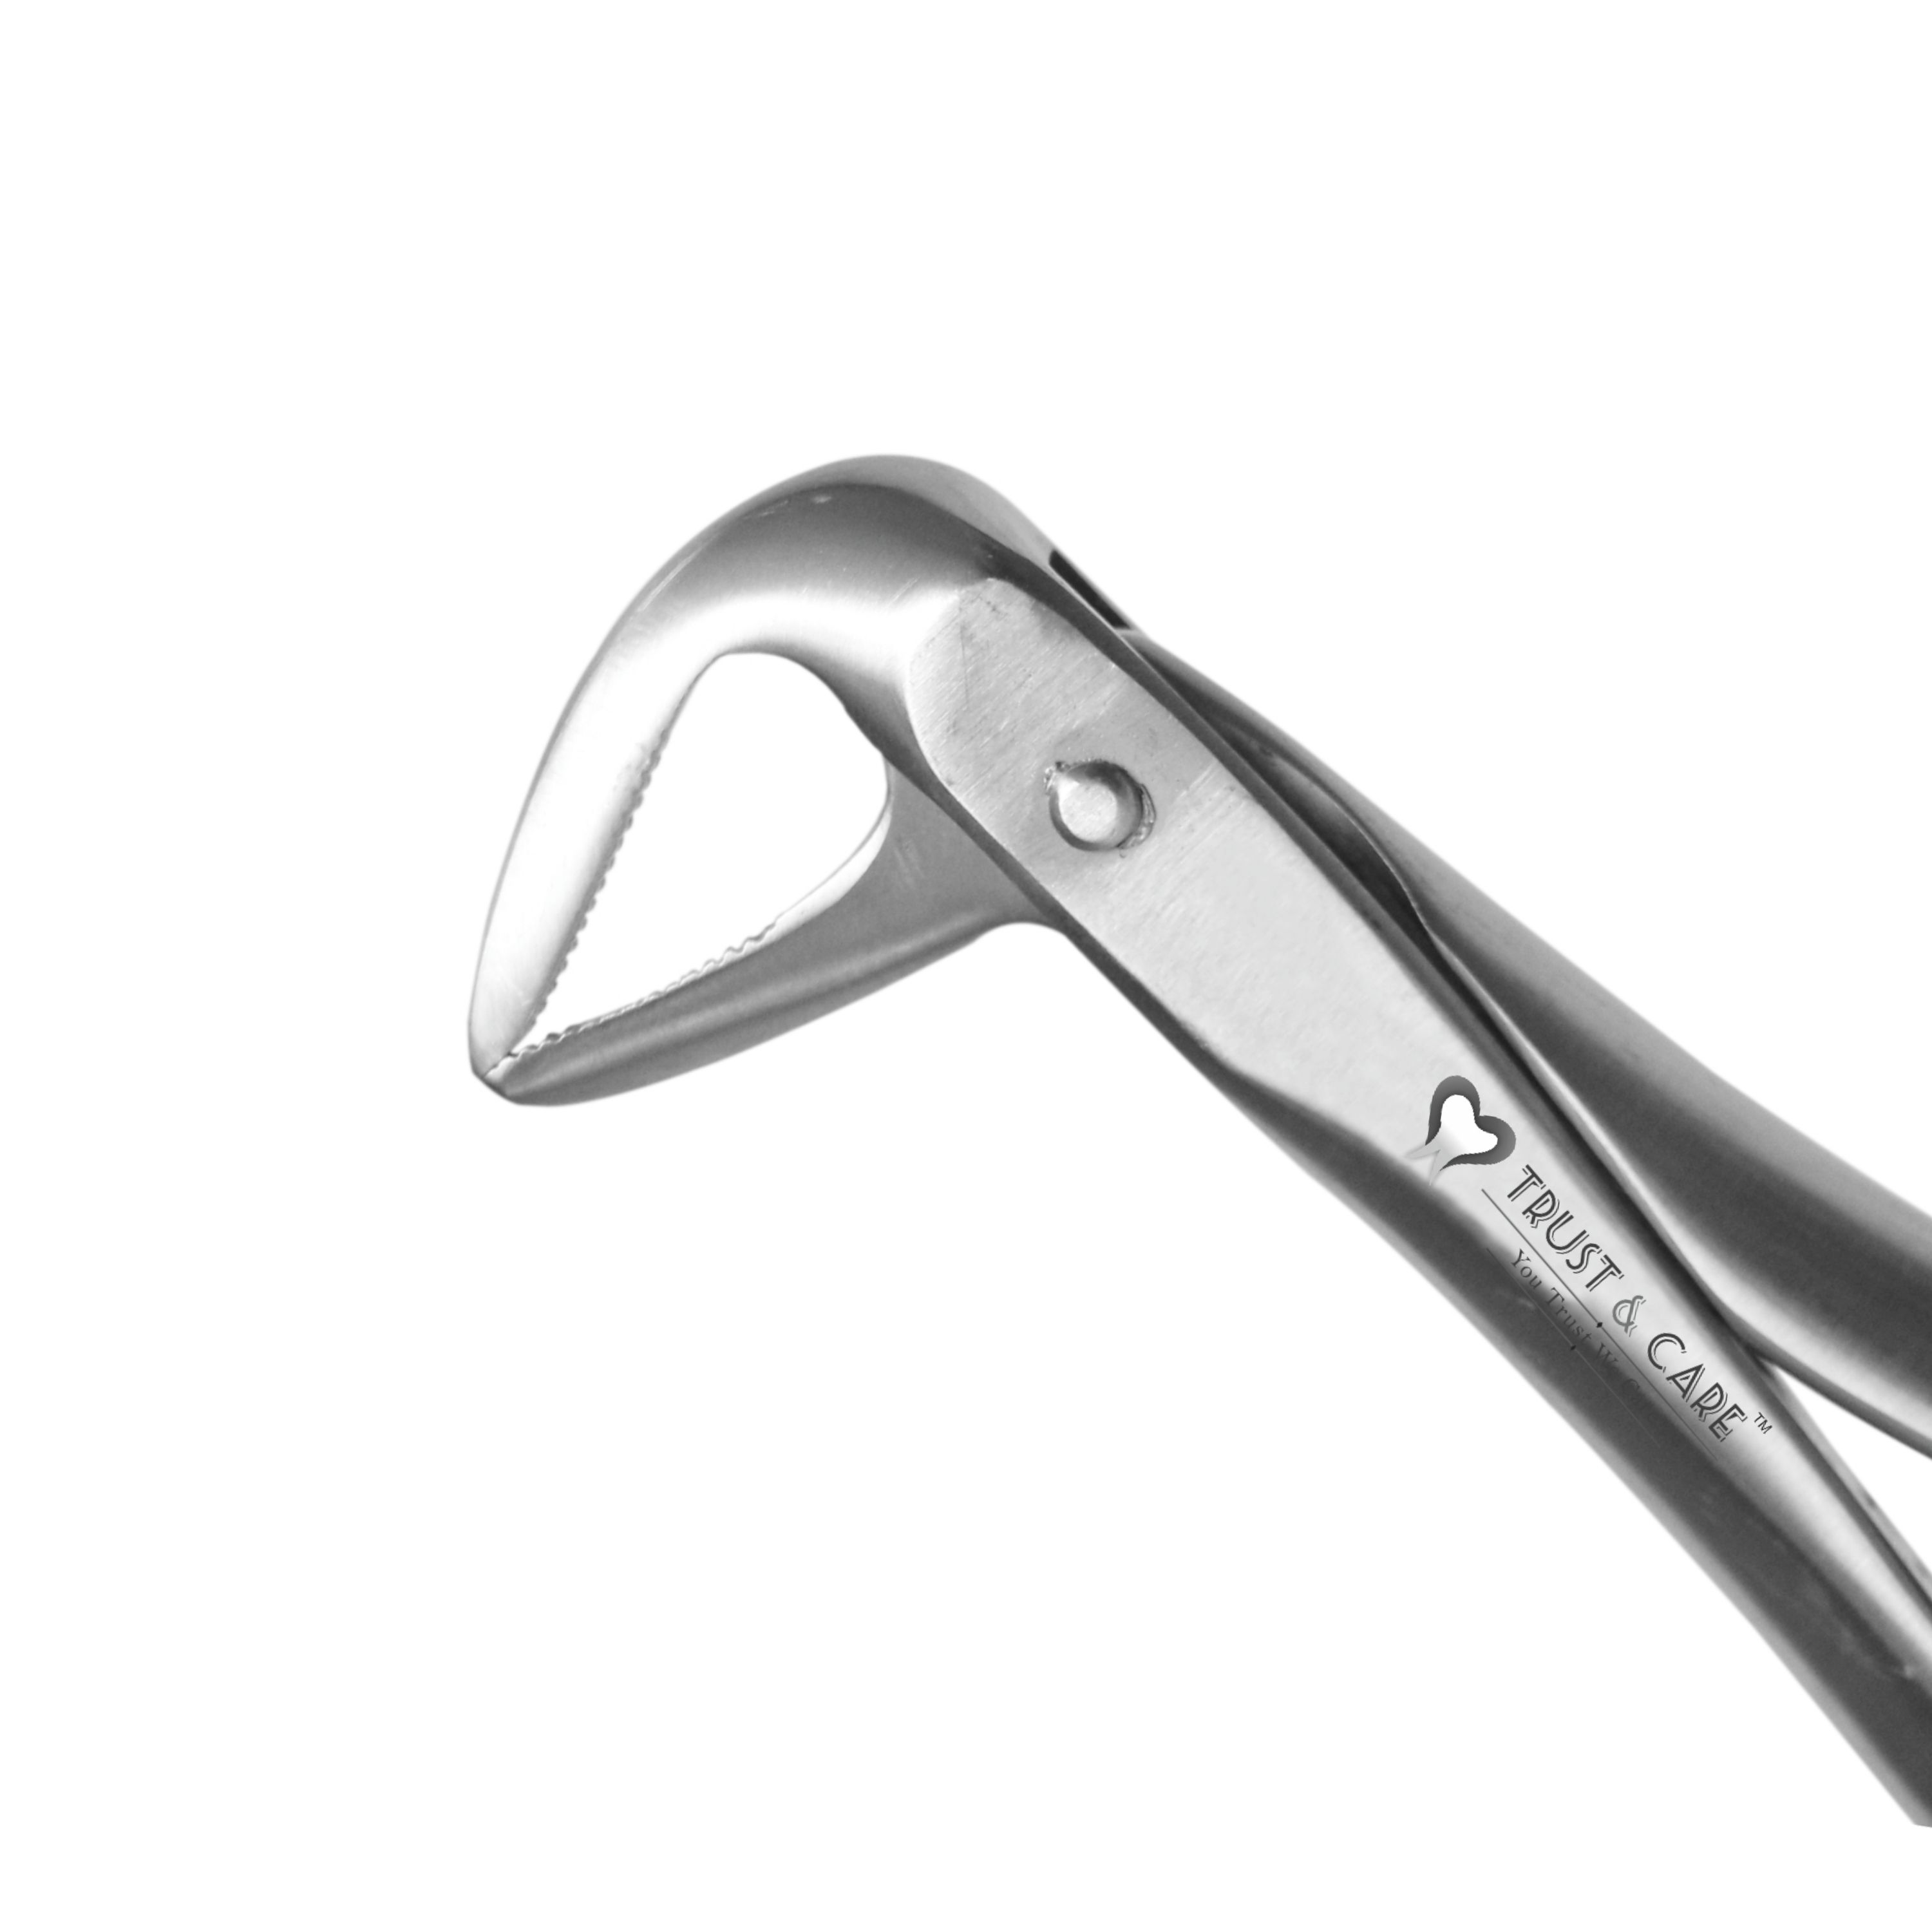 Trust & Care Tooth Extraction Forcep Lower Roots Fig No. 33 Standard